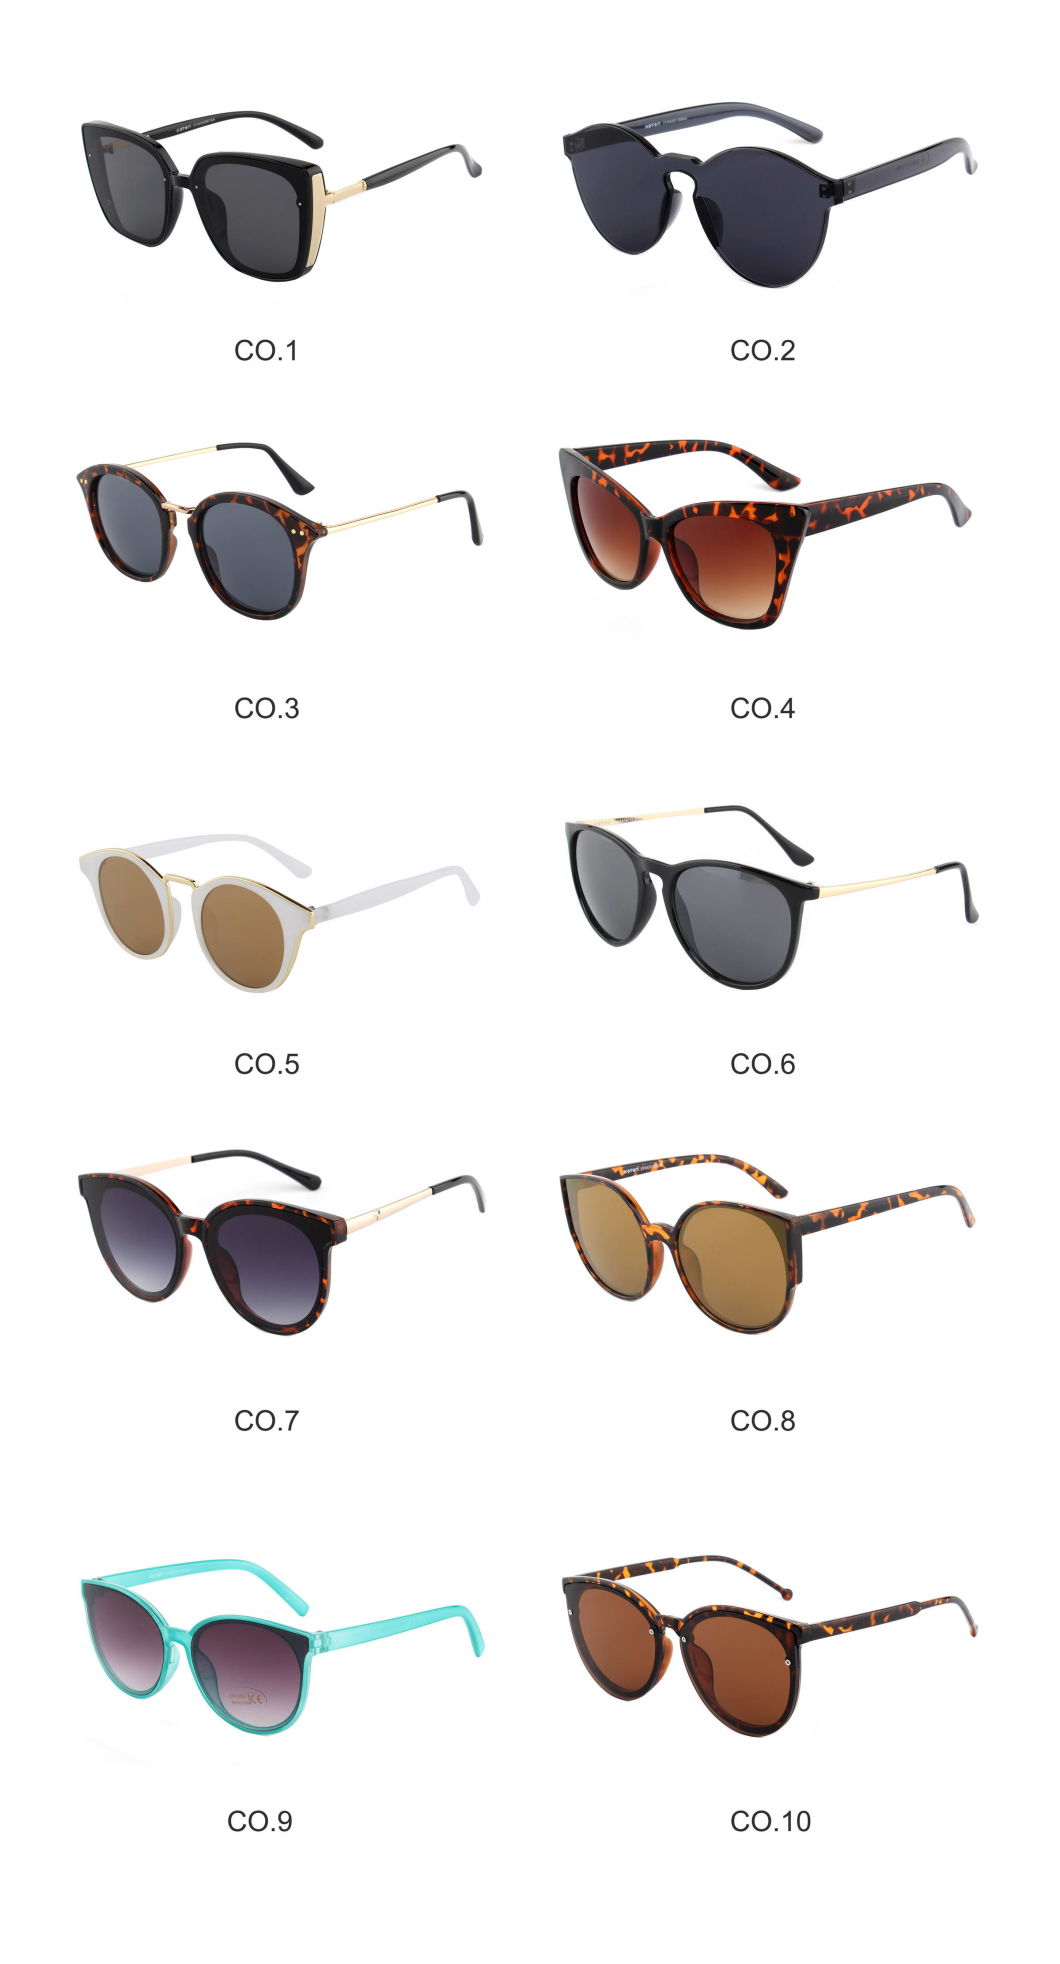 Cheap Sunglasses, Huge Discount Big Promotion Ready Stock UV400 Sunglasses Outlets for Lady, Men and Kids